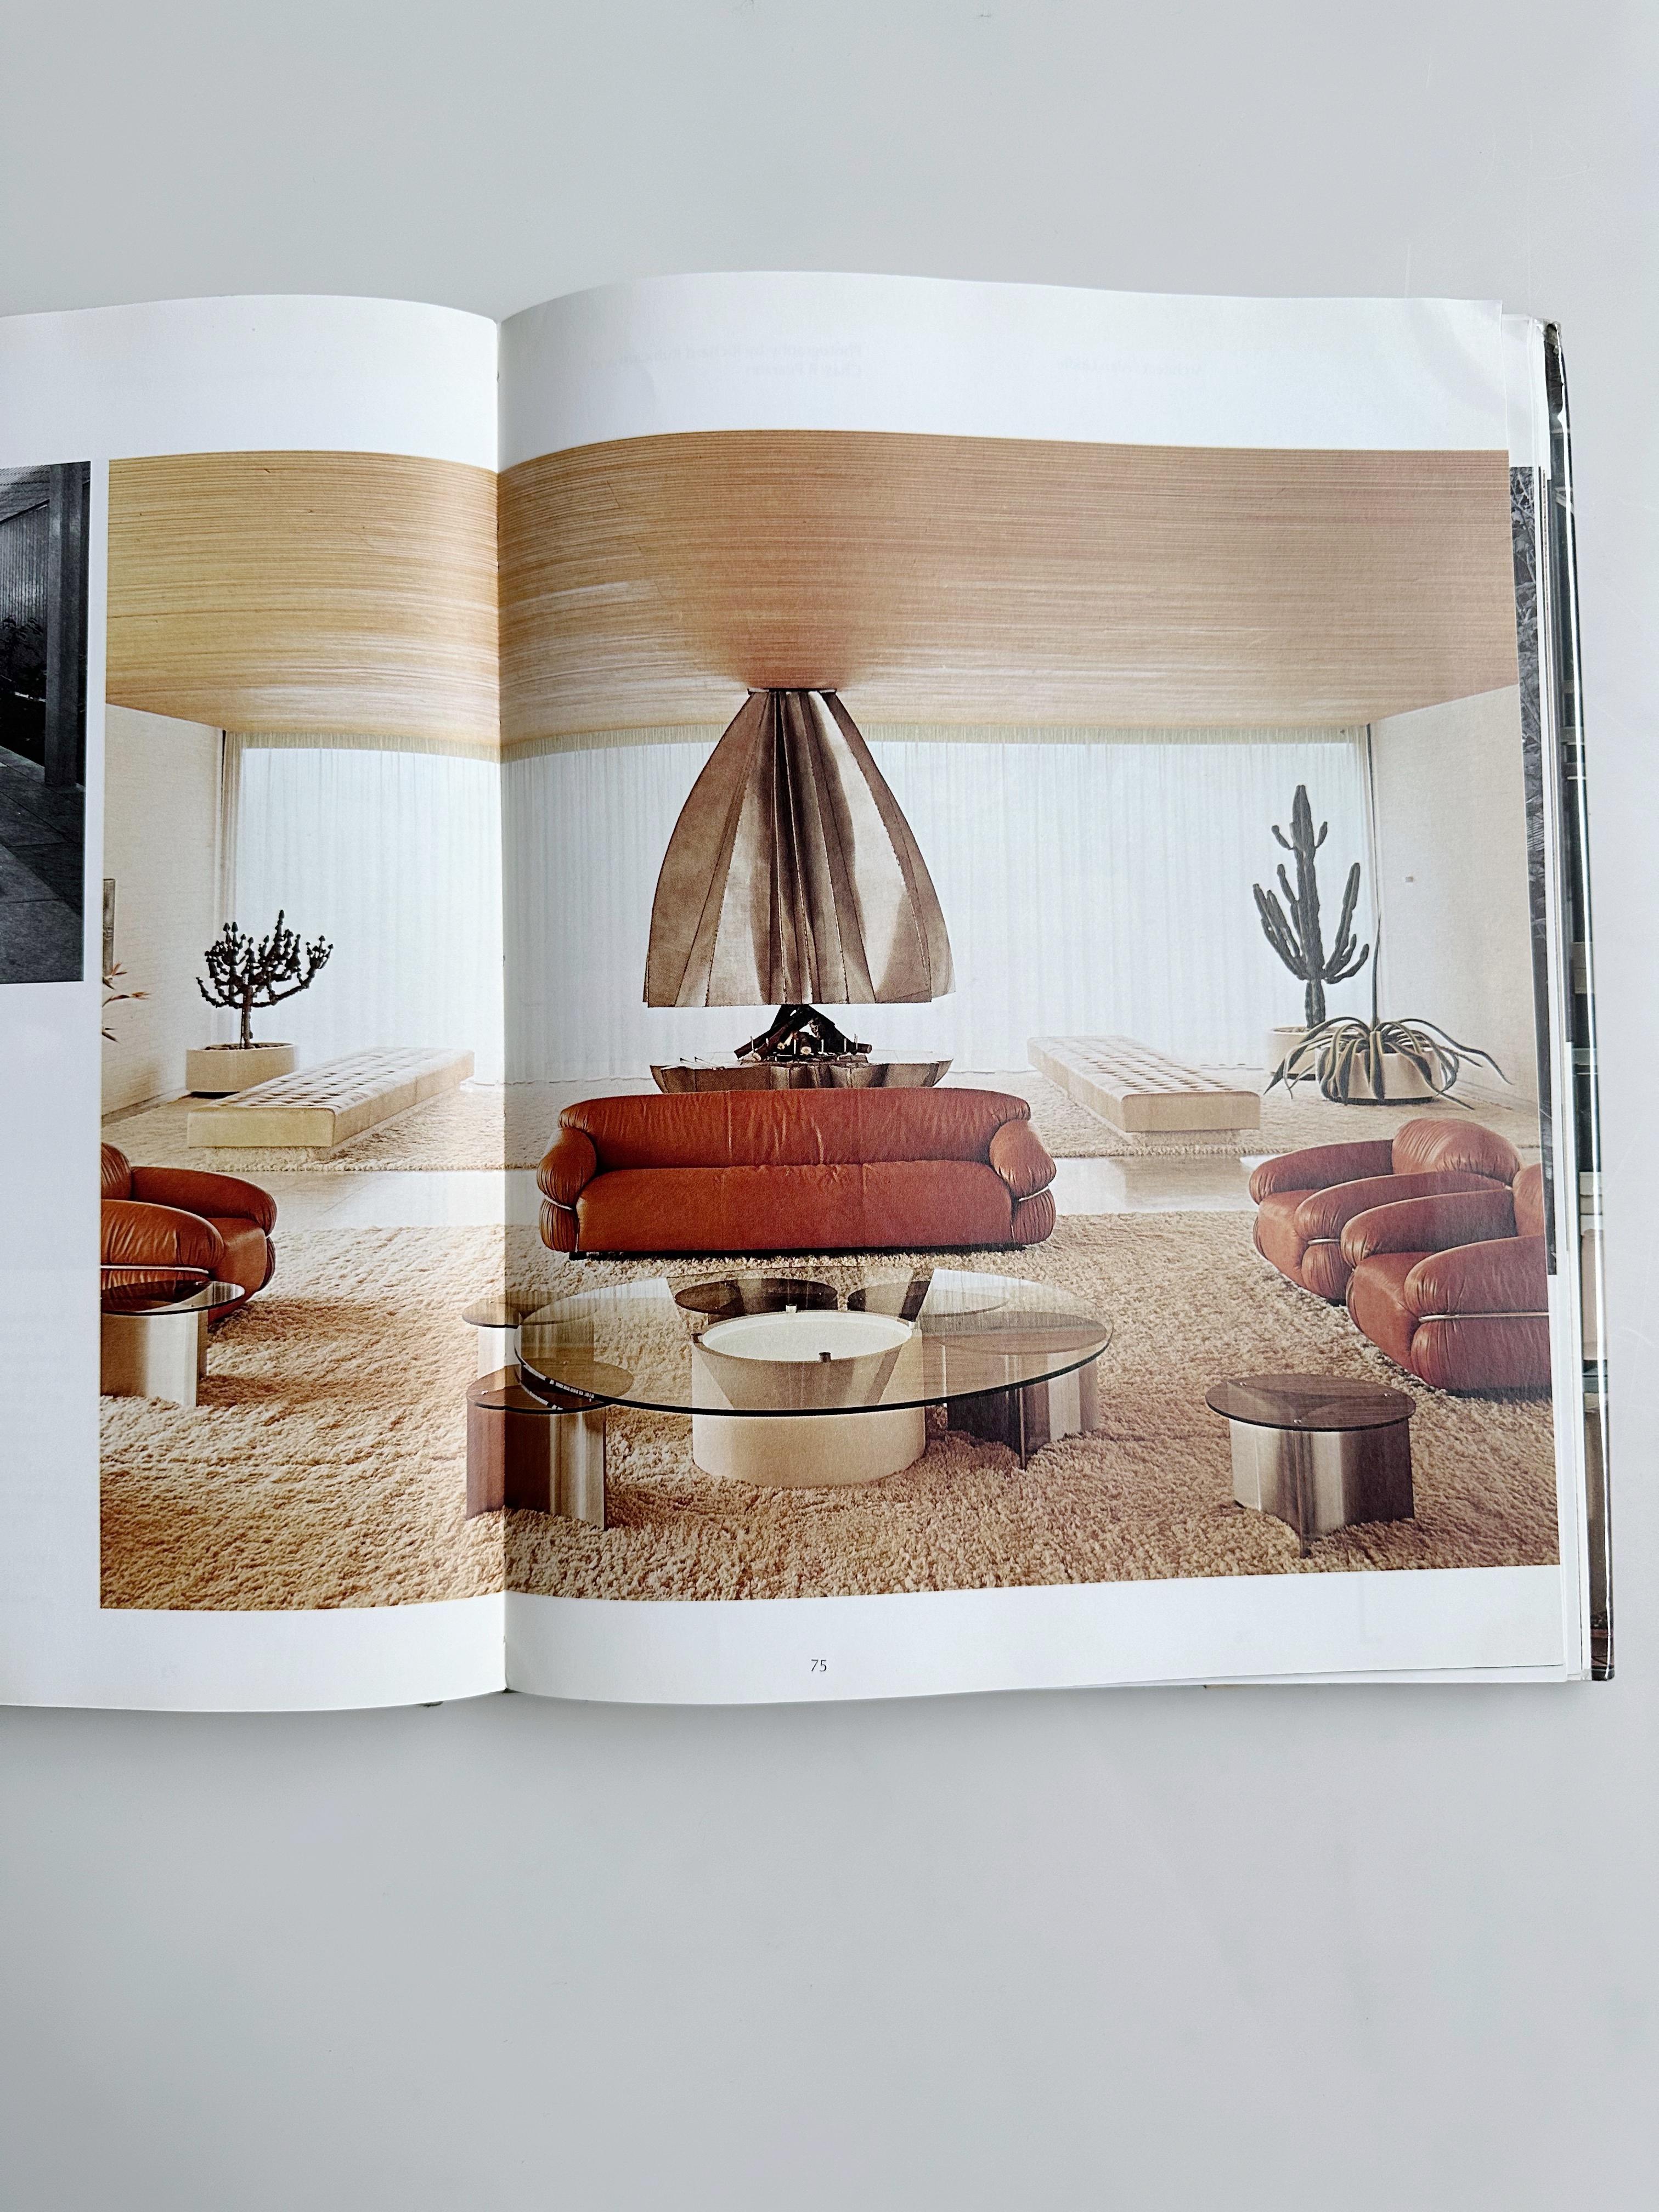 Decorative Arts and Modern Interiors, Schofield, 1977 For Sale 1